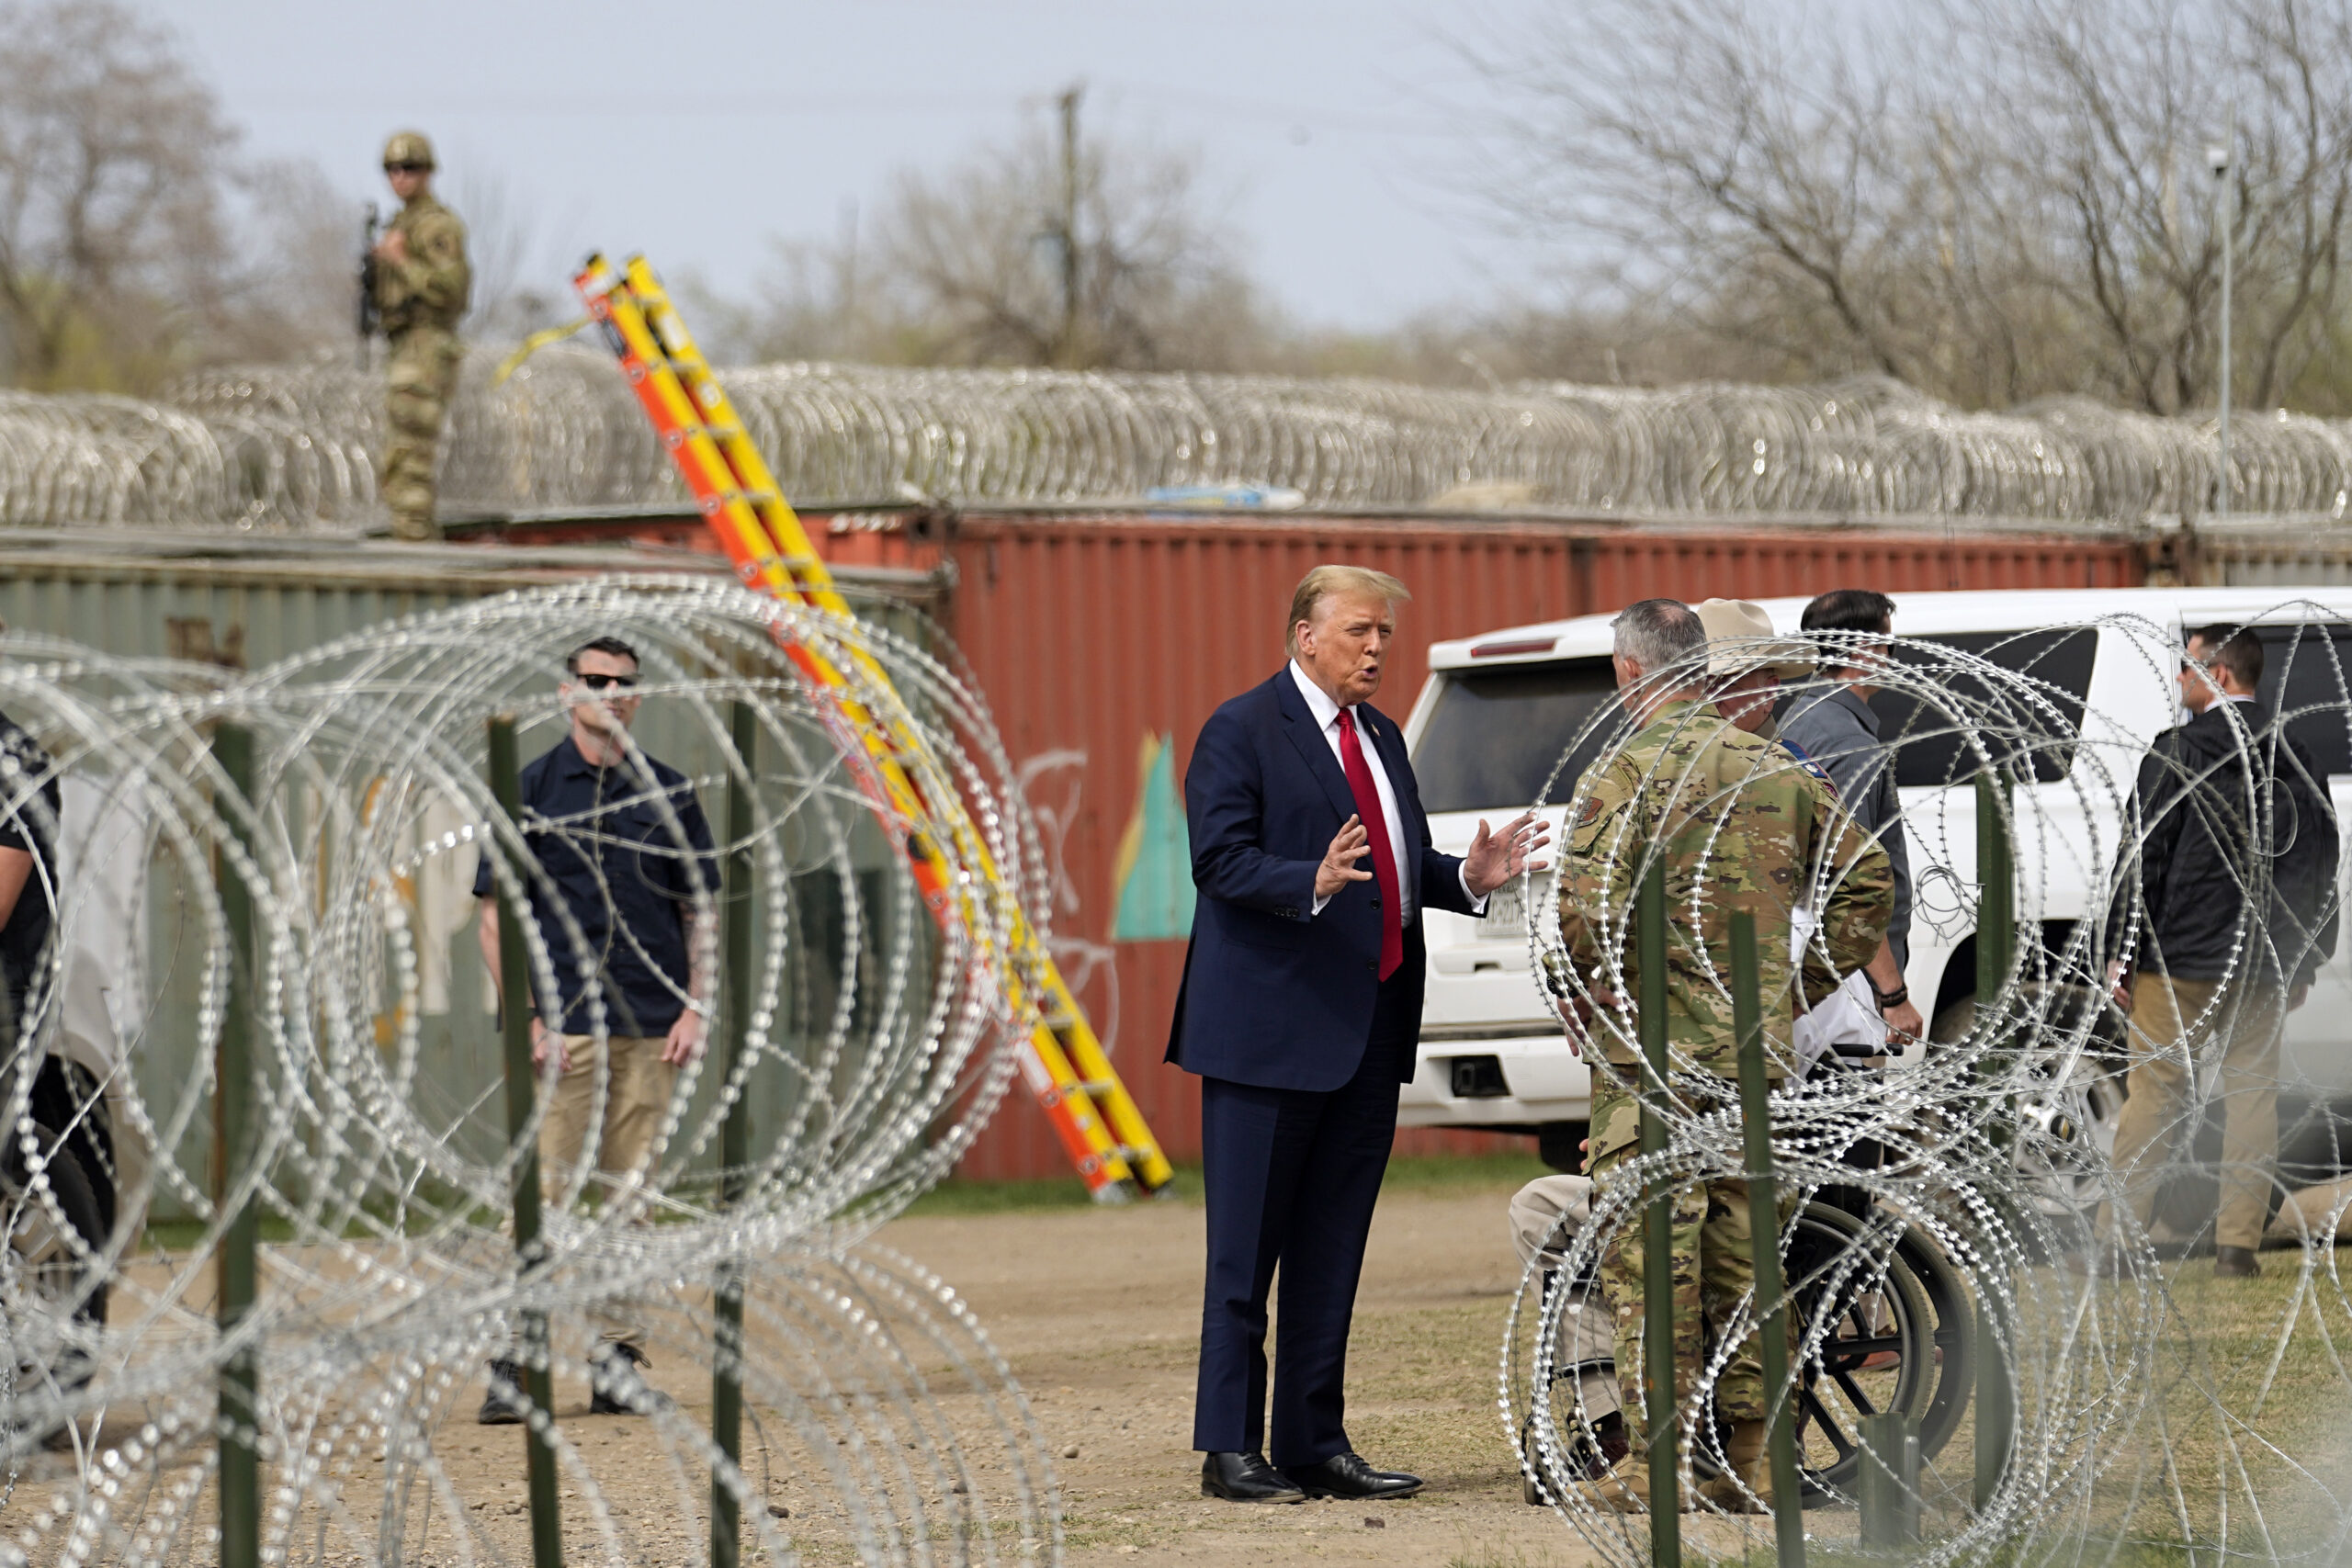 trump-called-migrants-“terrorists”-and-blamed-biden-for-an-“invasion”-during-his-visit-to-the-border